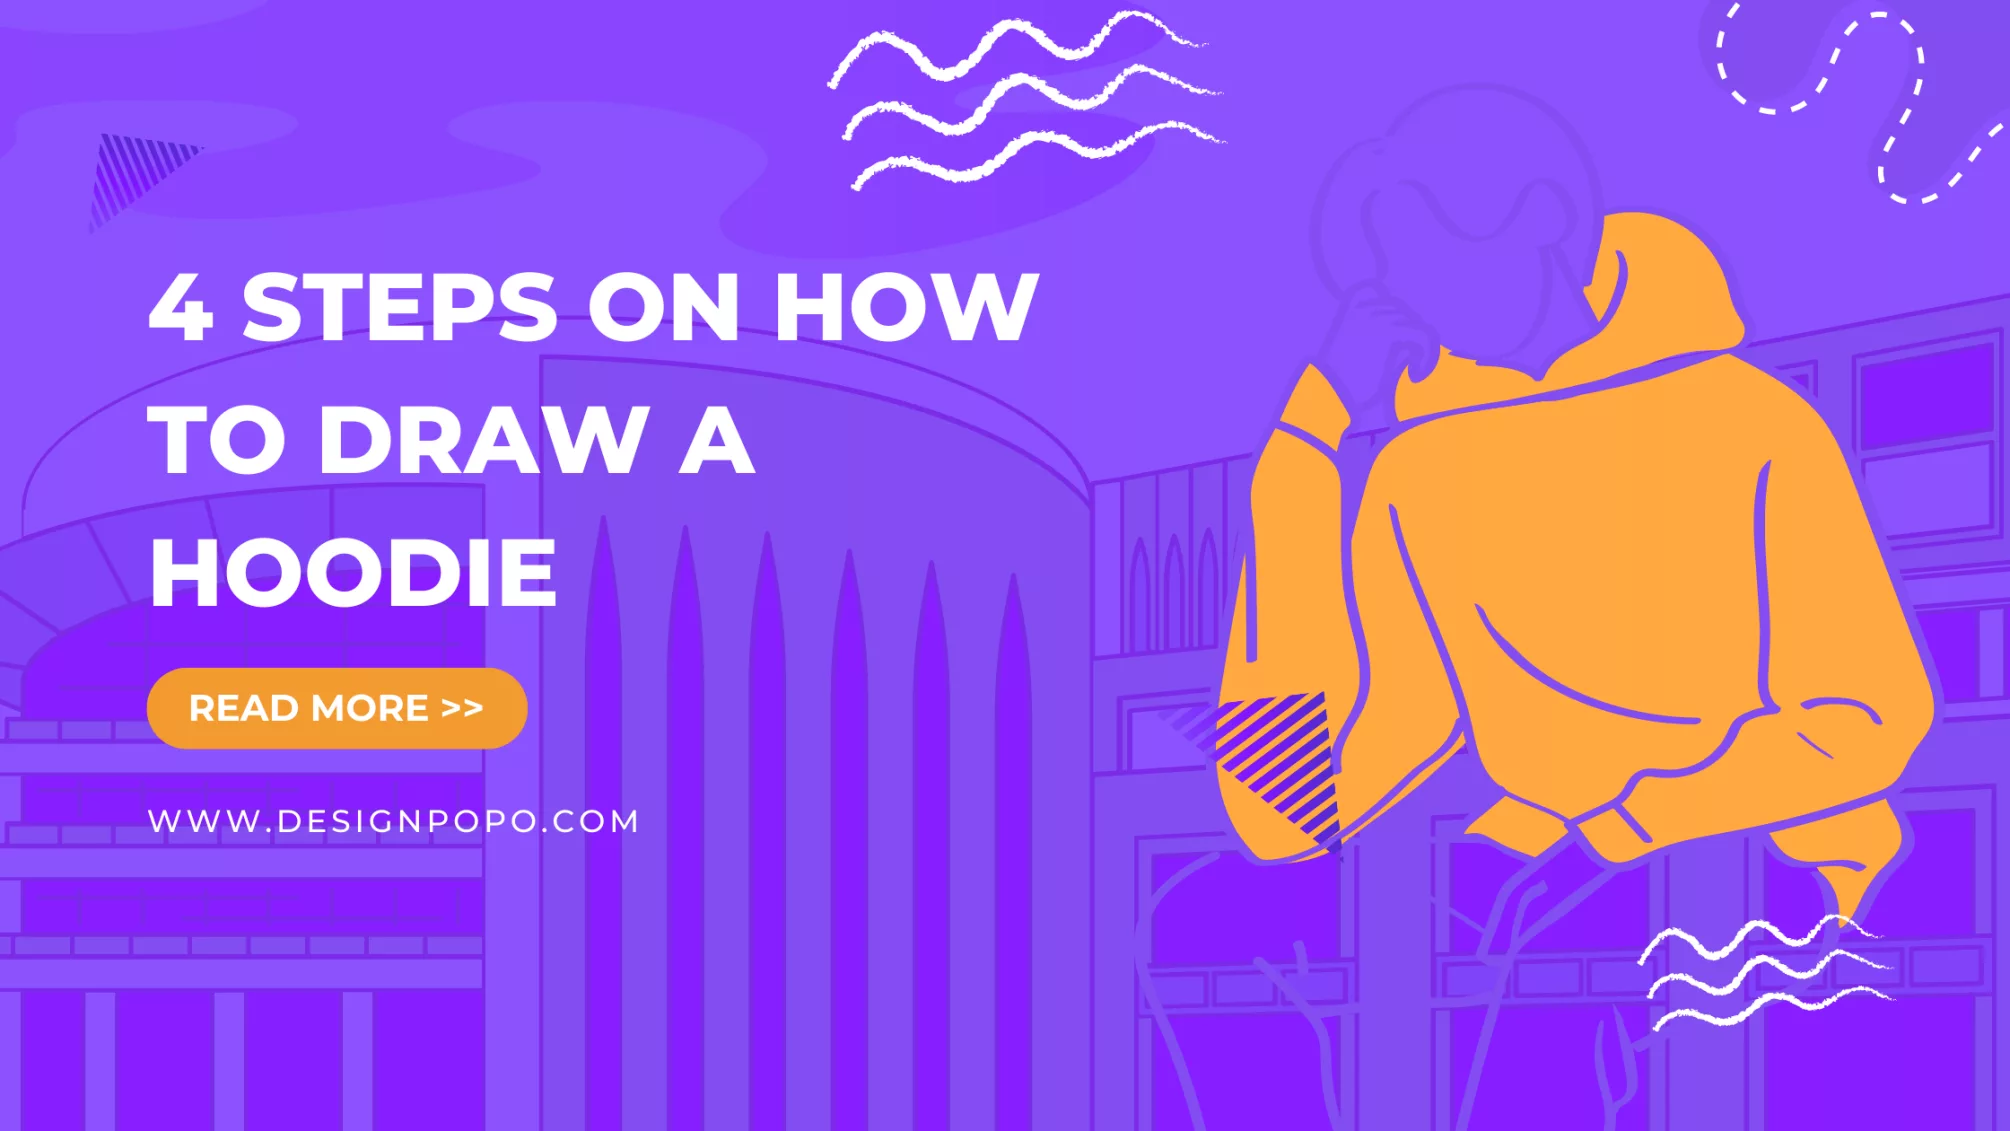 4 Steps How to Draw a Hoodie That Inspiring You! - DESIGNPOPO